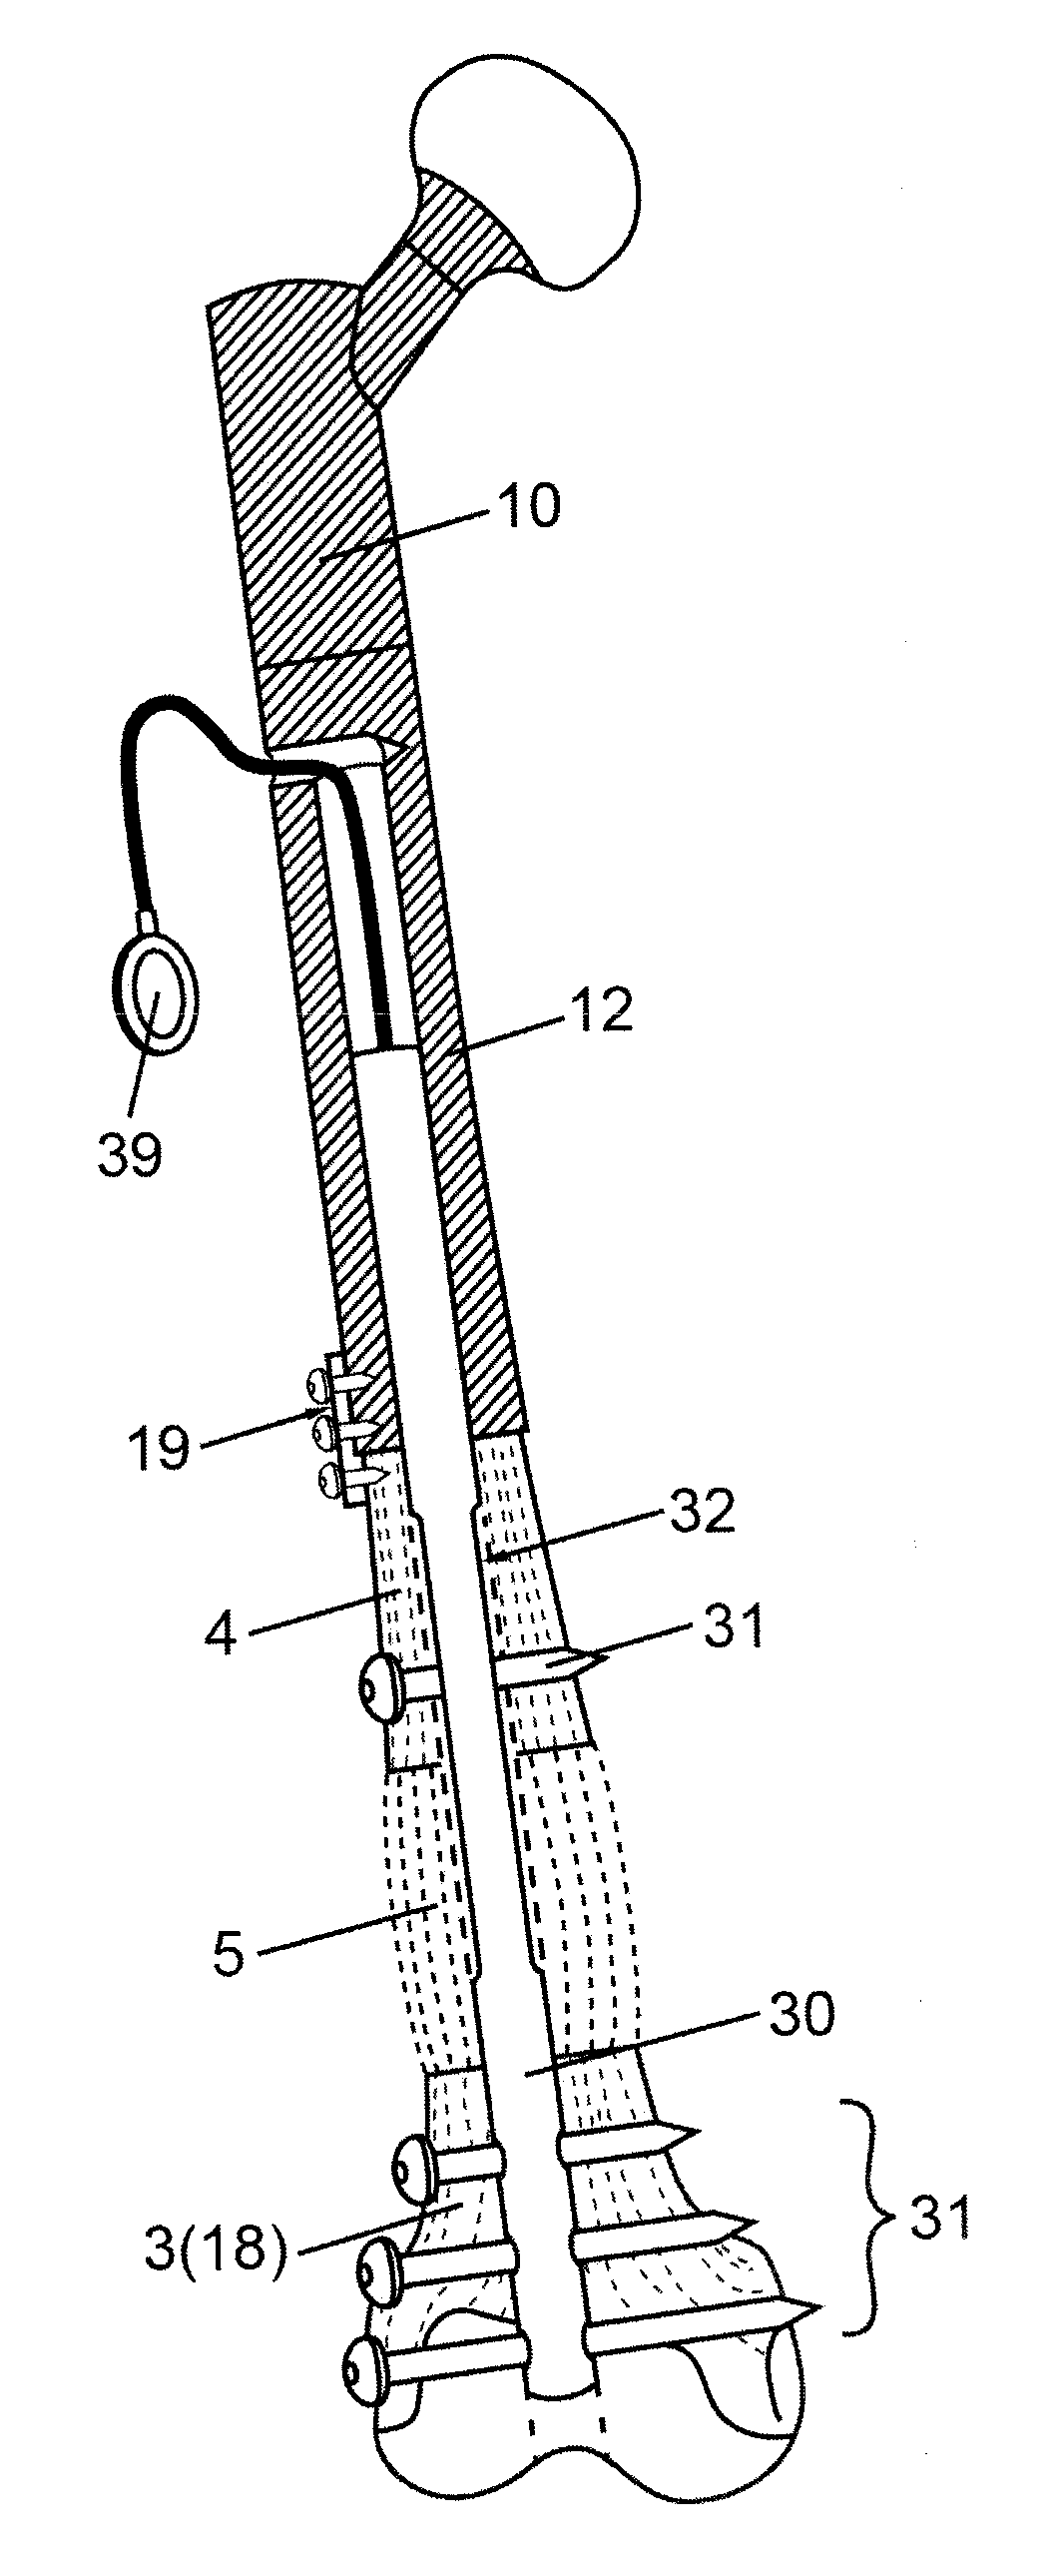 Implantable prosthesis for replacing a human hip or knee joint and the adjoining bone sections